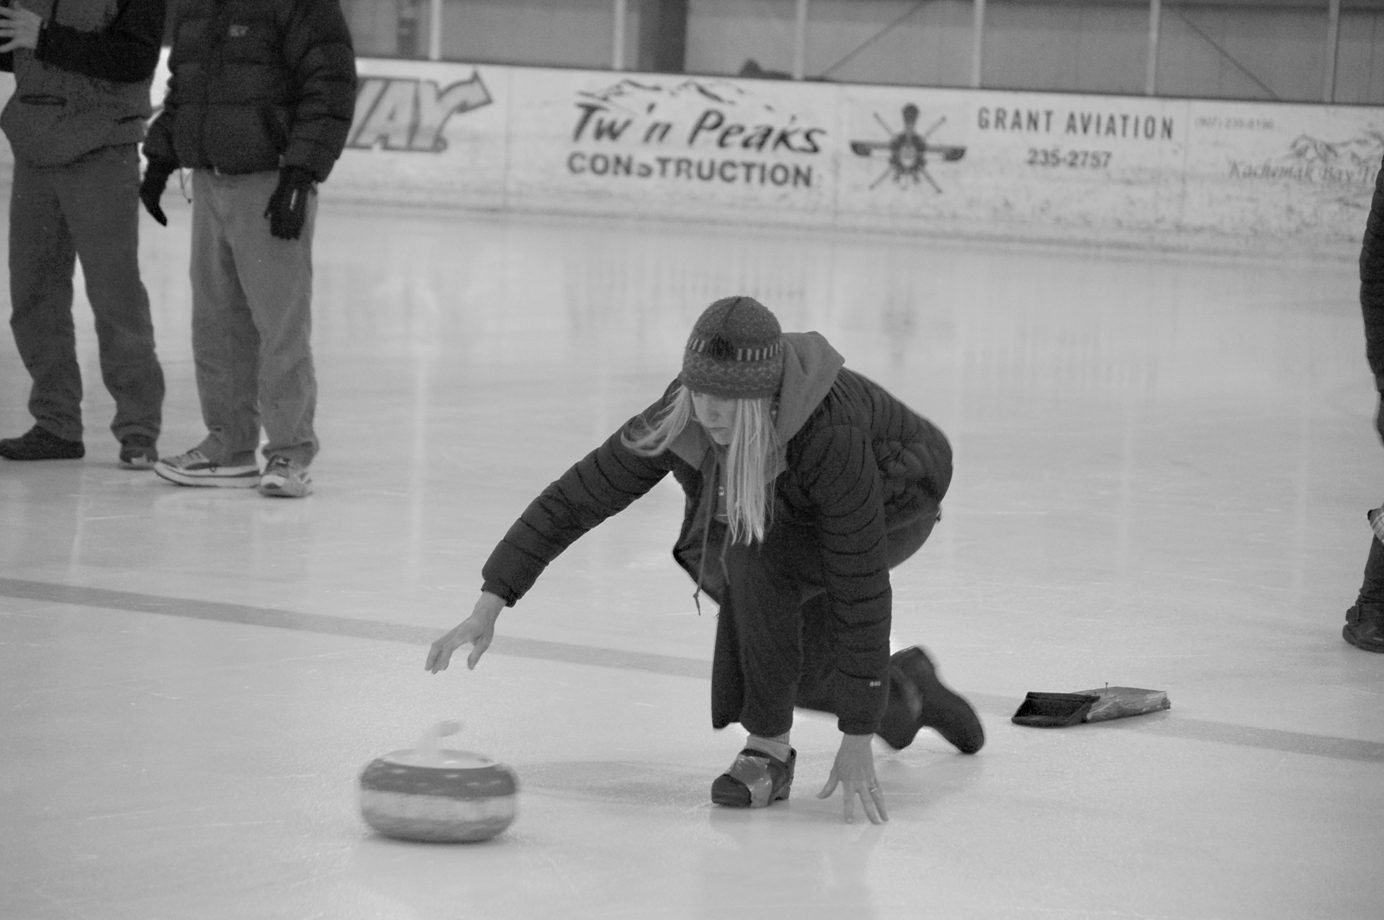 Michelle Hatten throws a stone durlng a curling demonstration in November of 2012 for the Homer Hockey Association’s Kevin Bell Appreciation Day. Hatten improvised a curling shoe by wrapping duct tape around the shoe. The Kevin Bell Ice Arena was the curling venue when it first opened for the 2006 Arctic Winter Games.-Photo by Michael Armstrong, Homer News